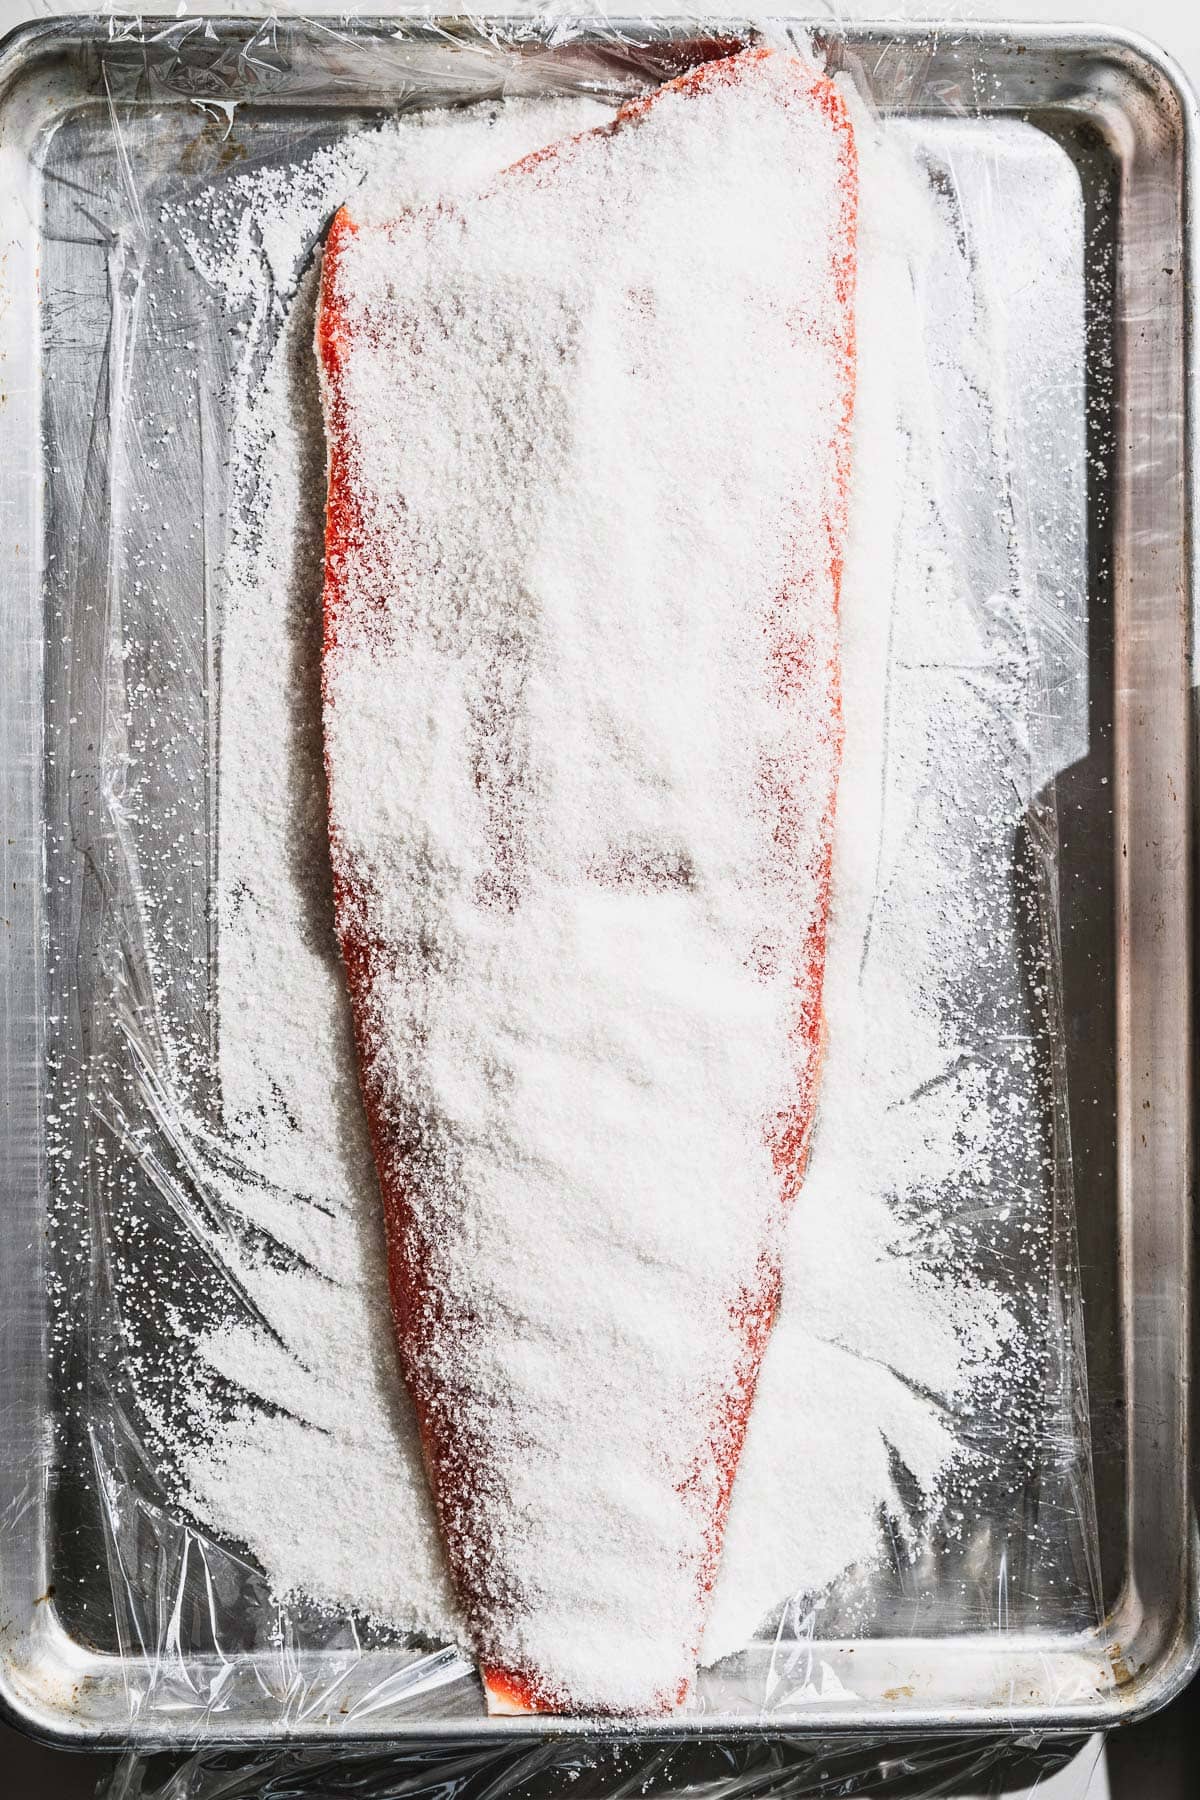 salmon filet on sheet pan for cold smoking with brine